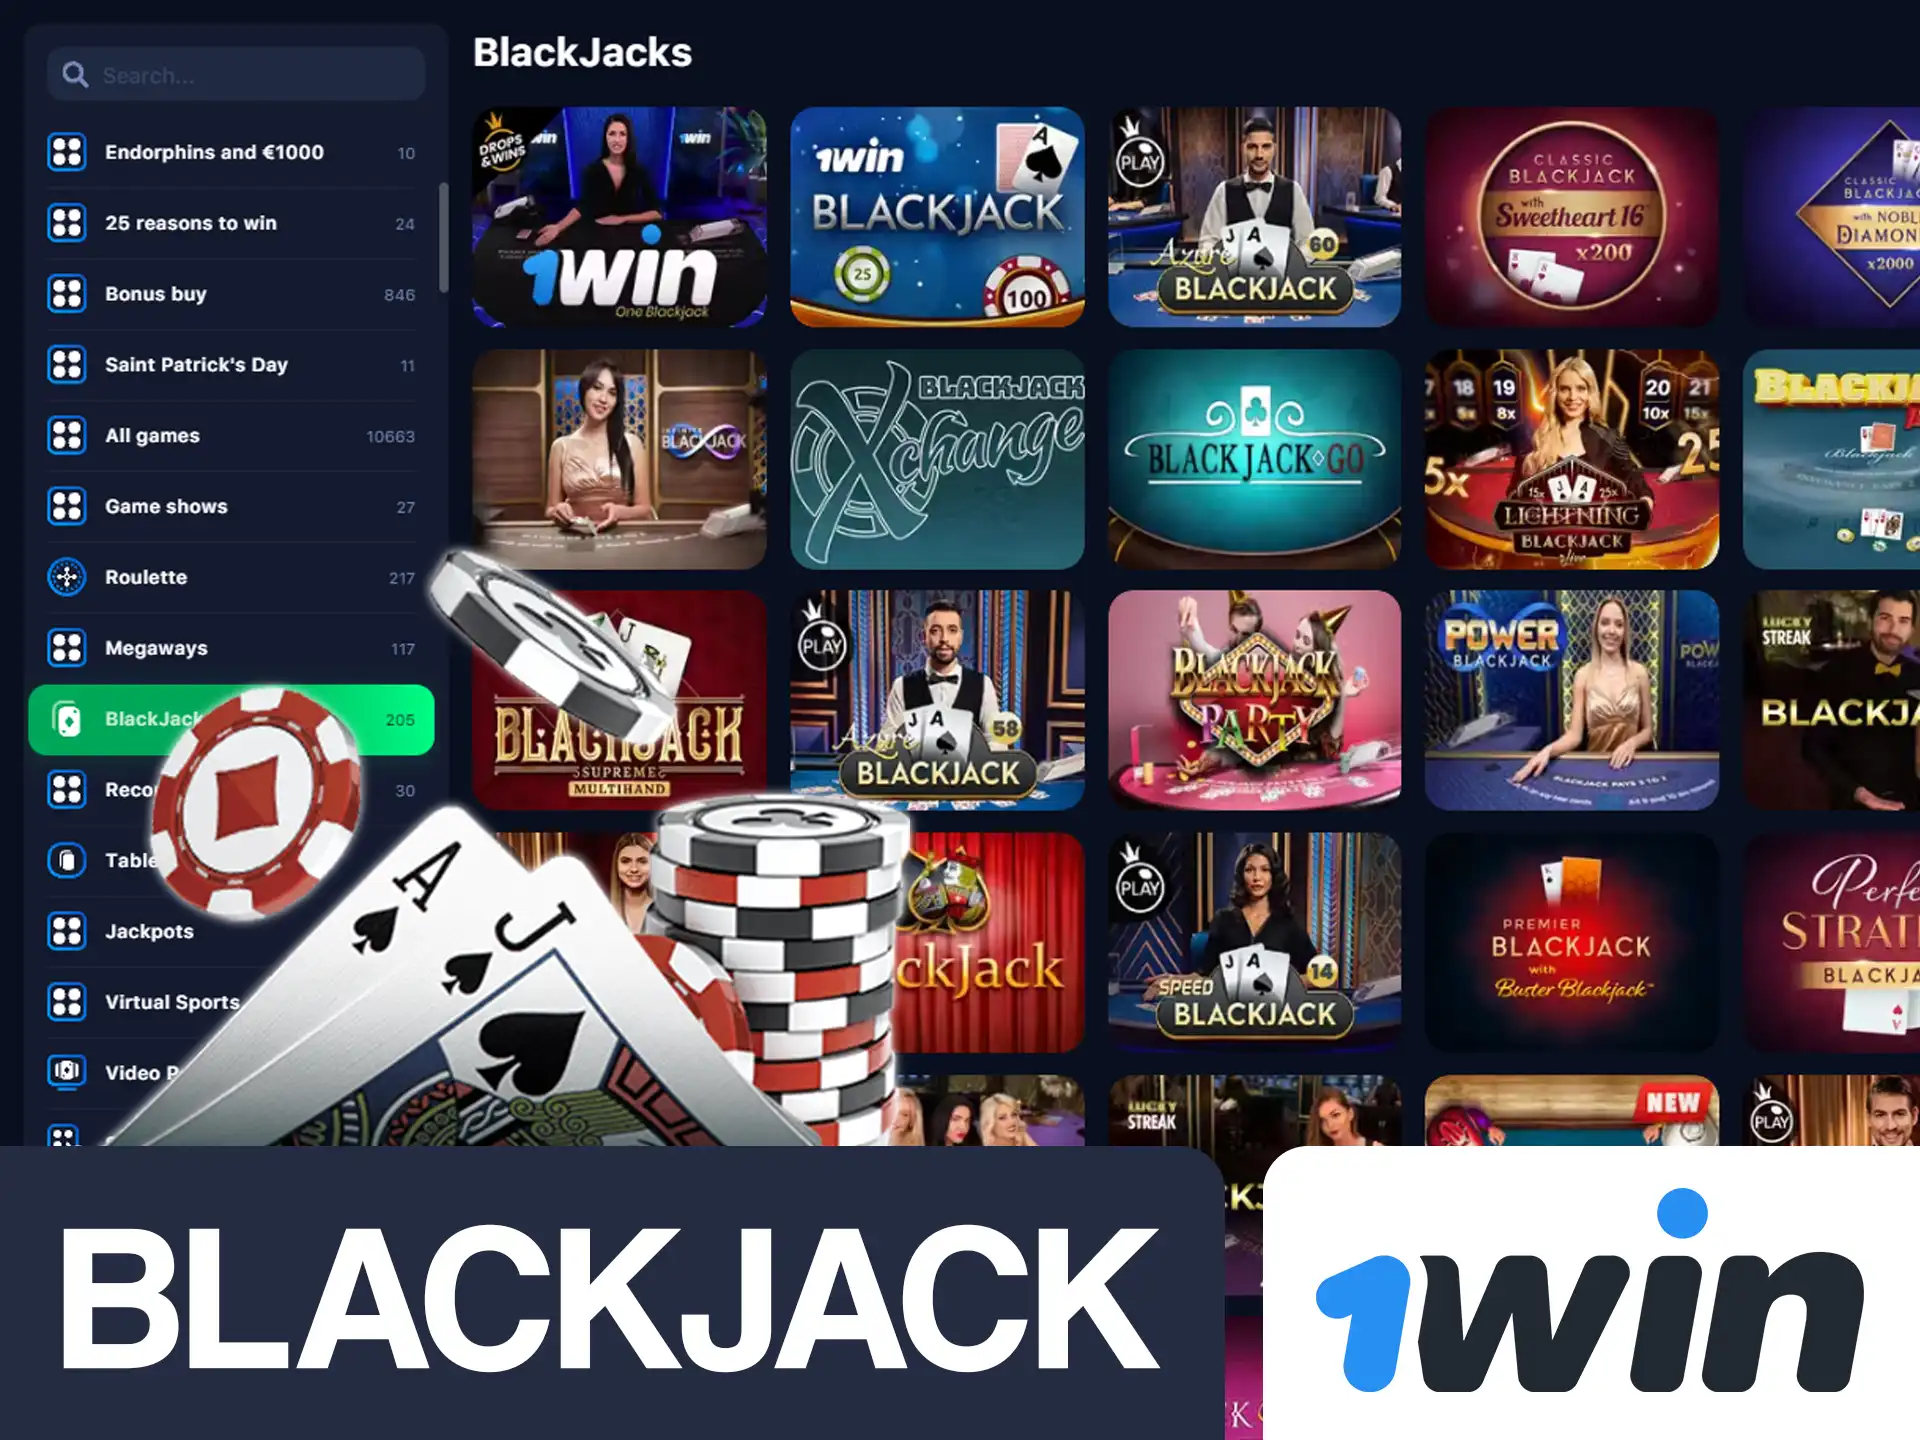 Win huge amount of money by playing blackjack at 1win.